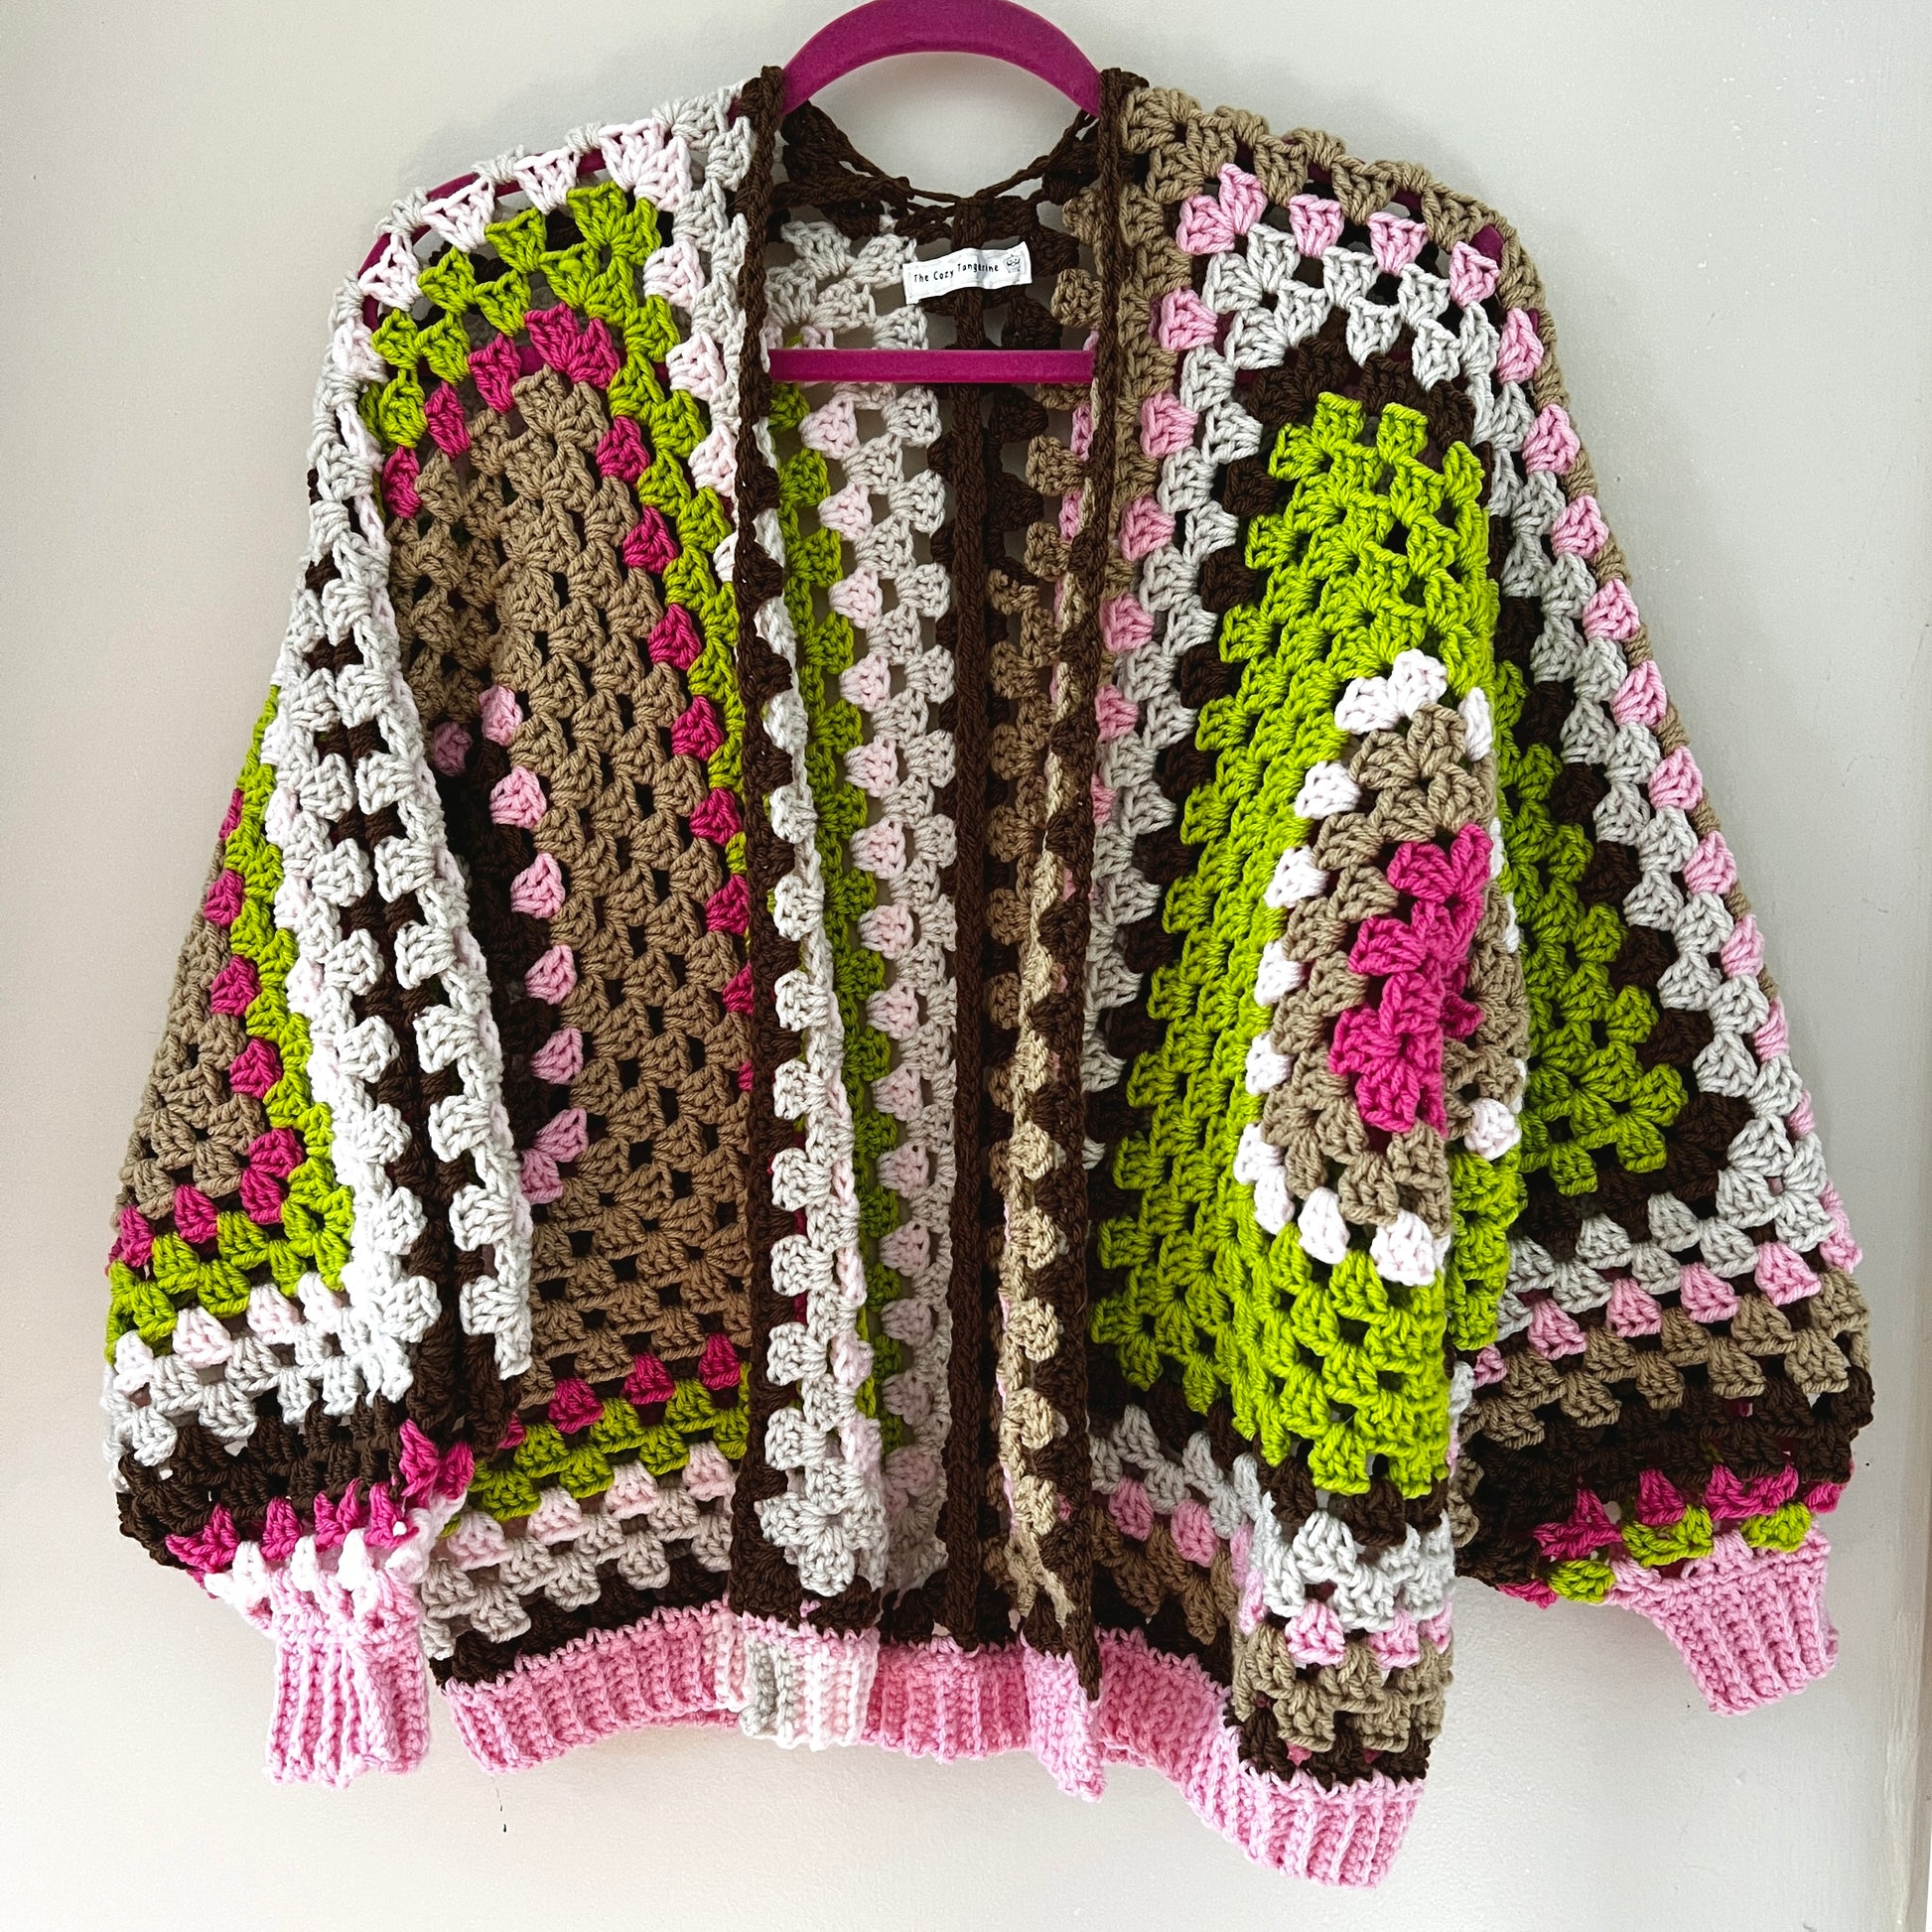 crochet granny stitch sweater. pink and green and brown balloon sleeve cardigan.